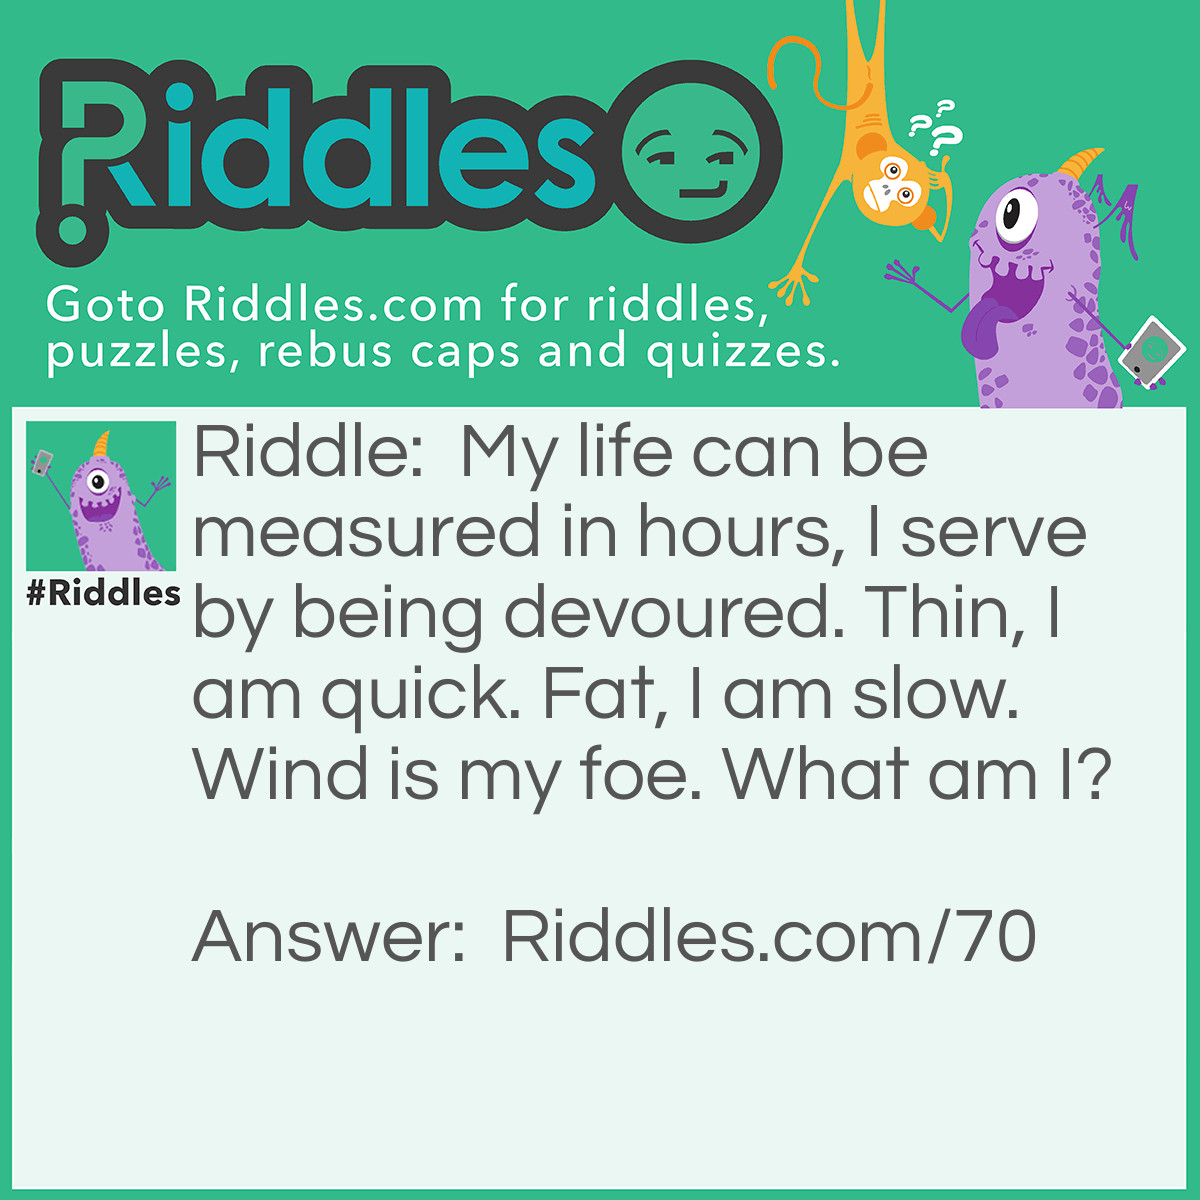 Riddle: My life can be measured in hours, I serve by being devoured. Thin, I am quick. Fat, I am slow. Wind is my foe. <a href="https://www.riddles.com/what-am-i-riddles">What am I</a>? Answer: I am a candle.